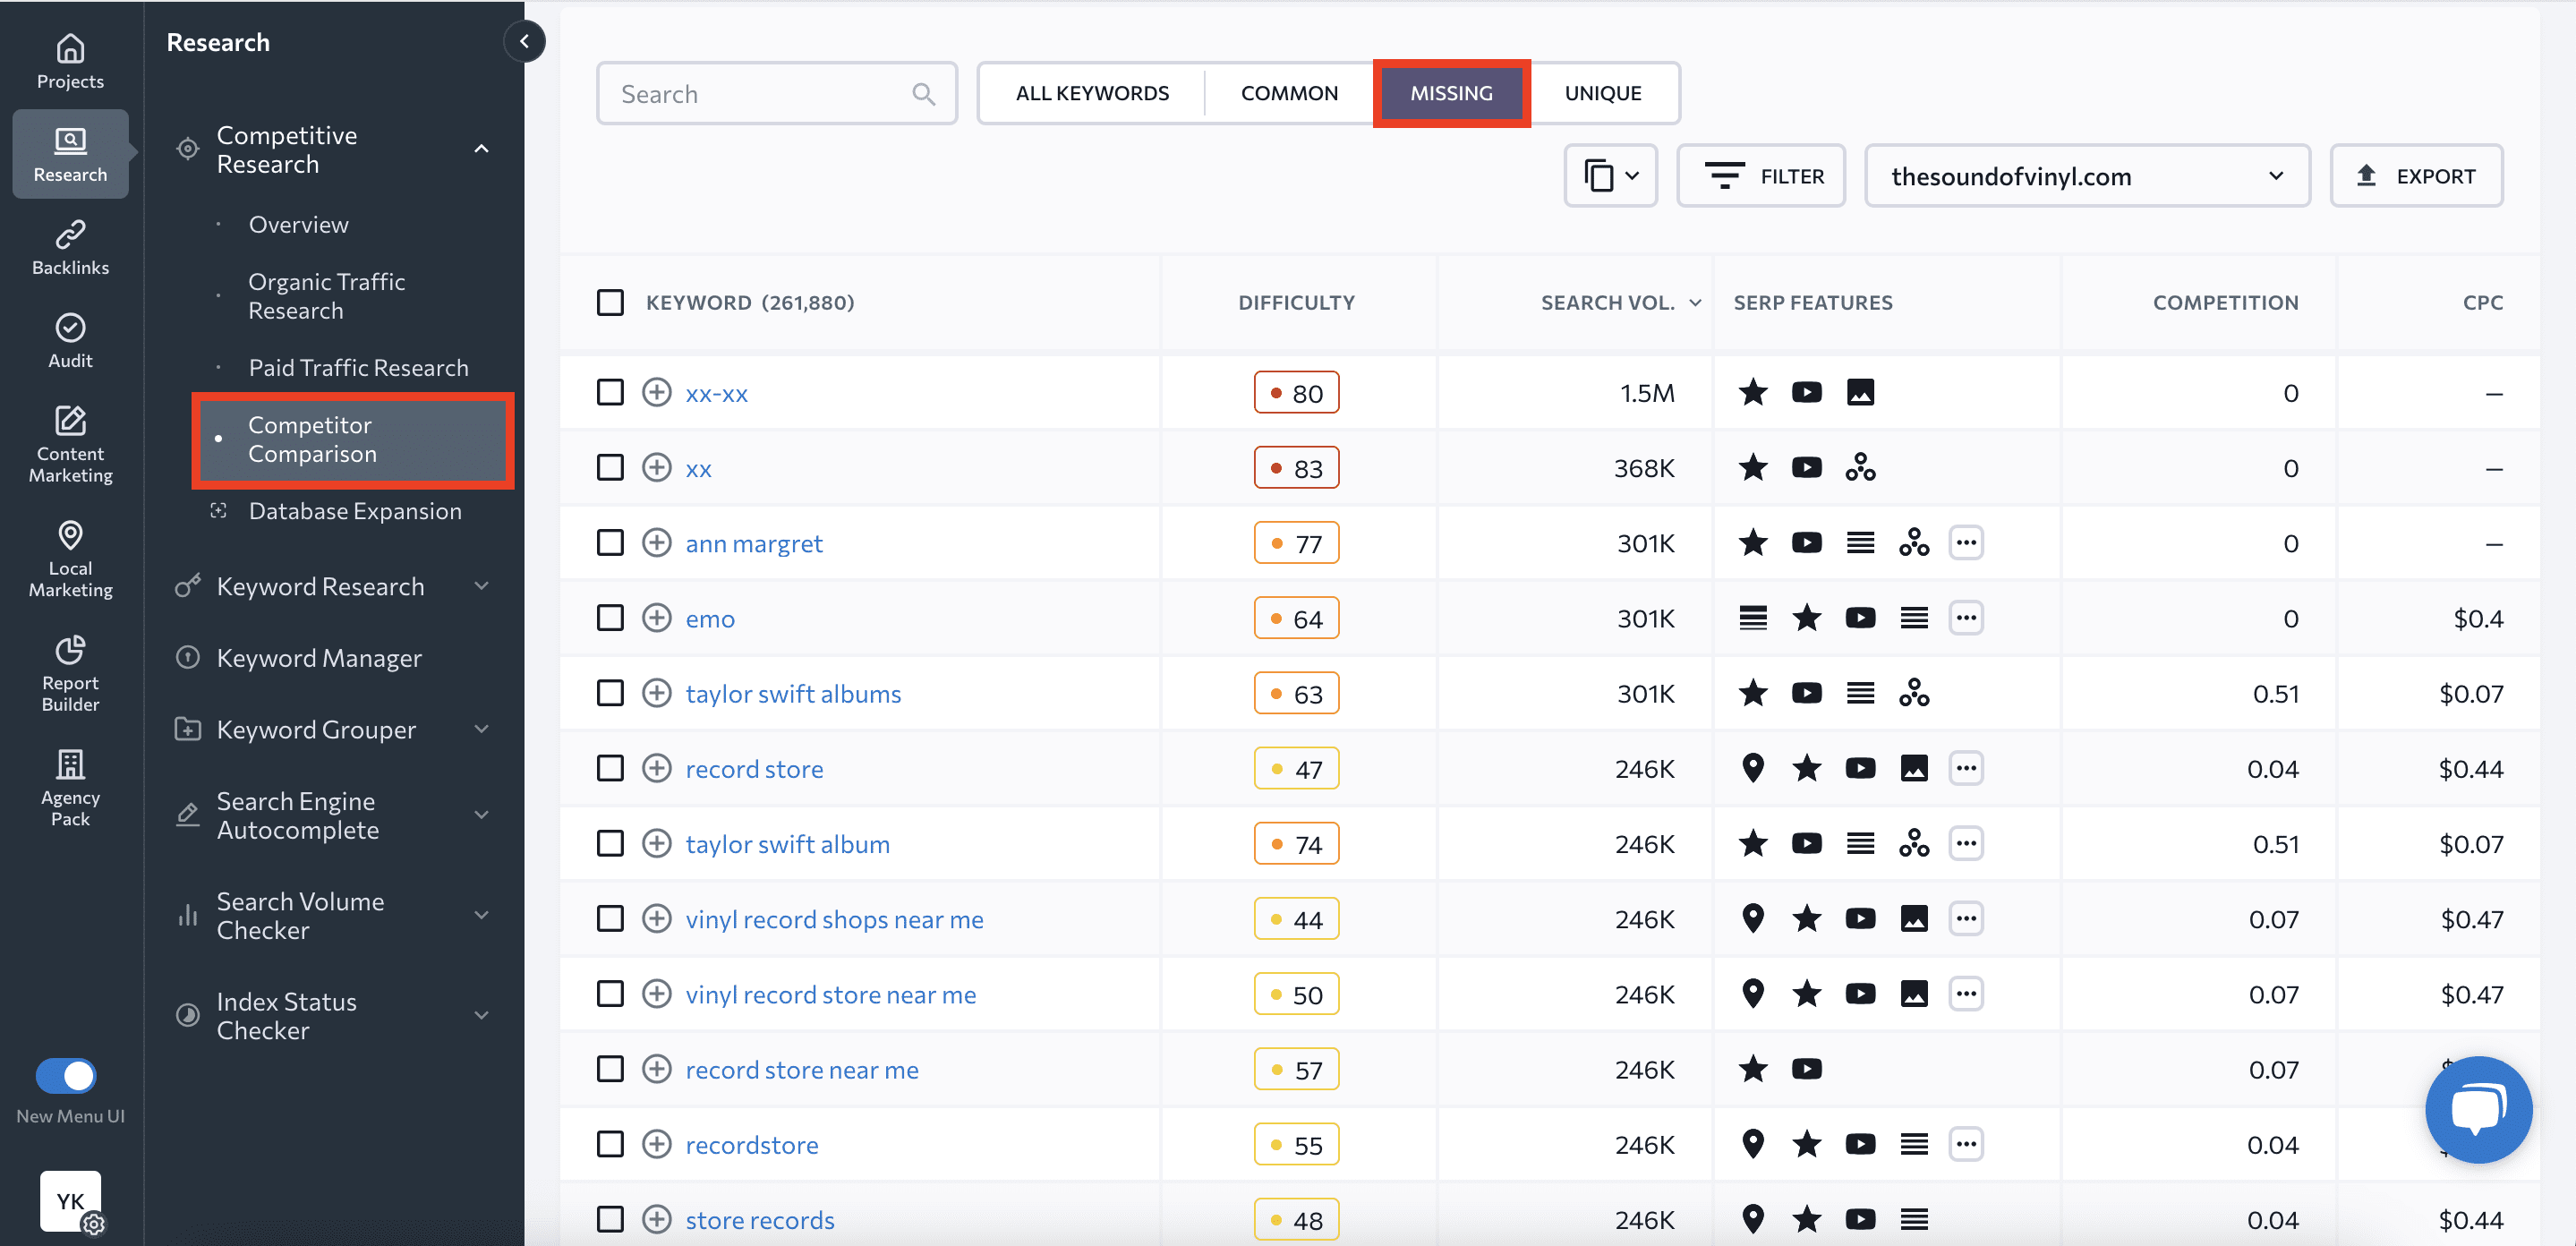 Missing keywords in Competitor Comparison